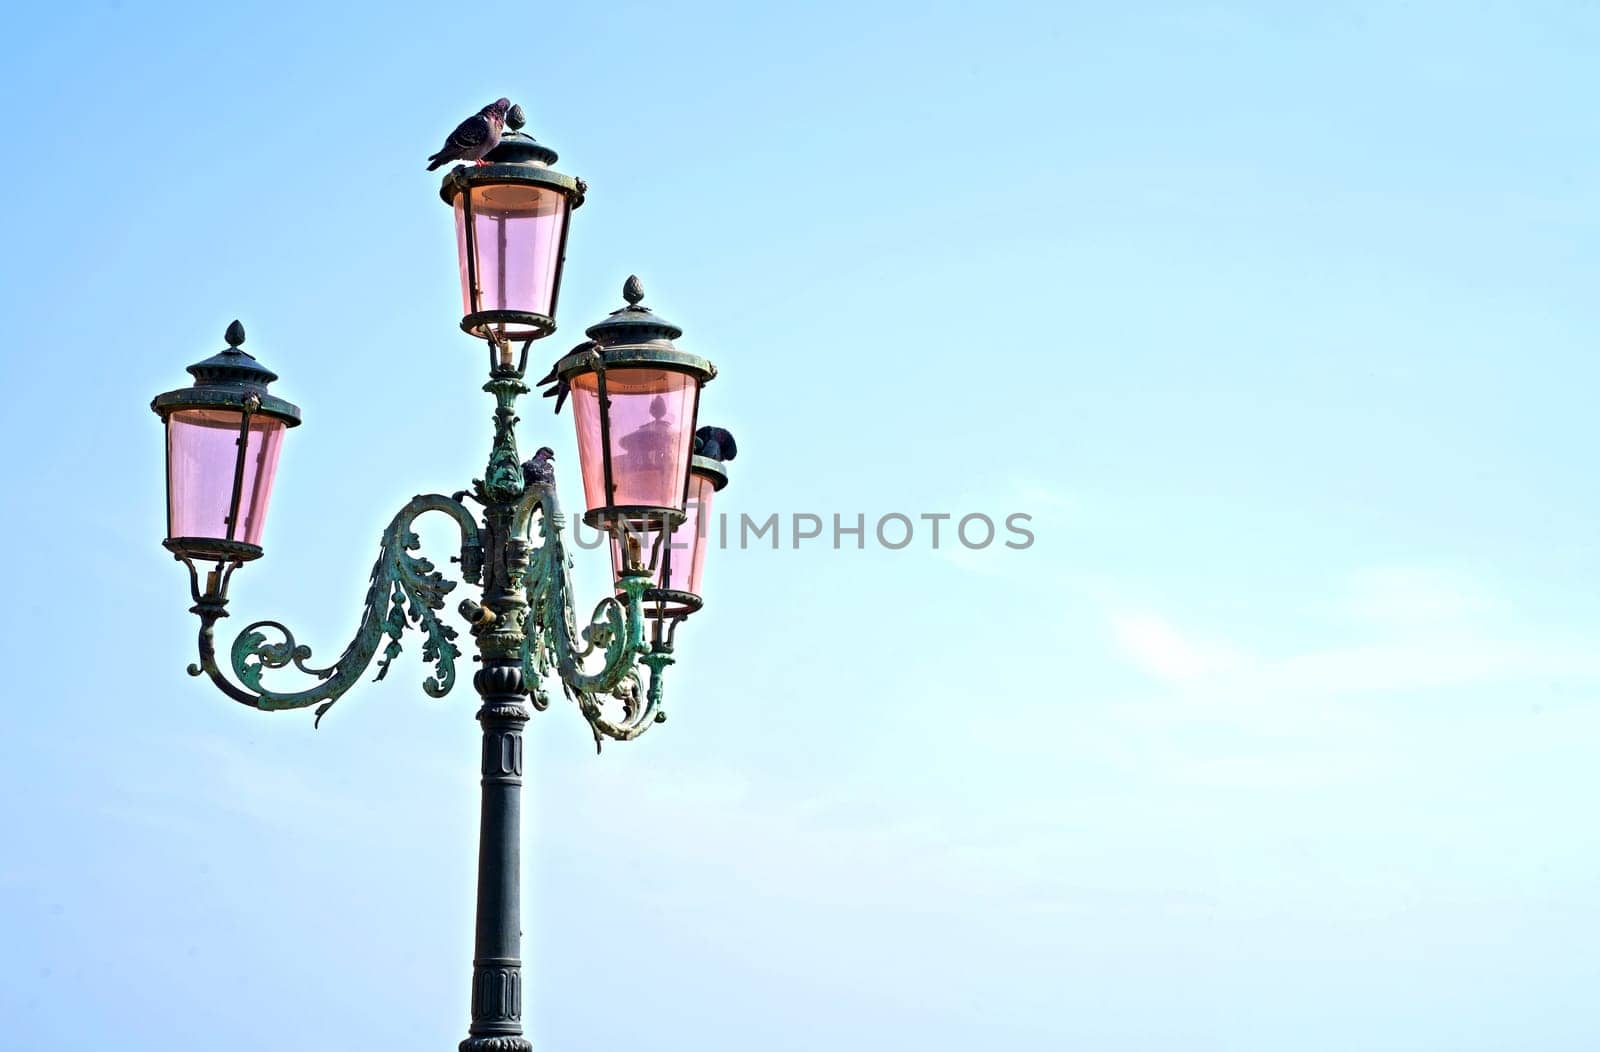 Lantern on the street of Venice. The famous pink lights of Venice. Four lamps with pink glass are on an ornate black metal lamp post. Blue cloudless sky. by aprilphoto